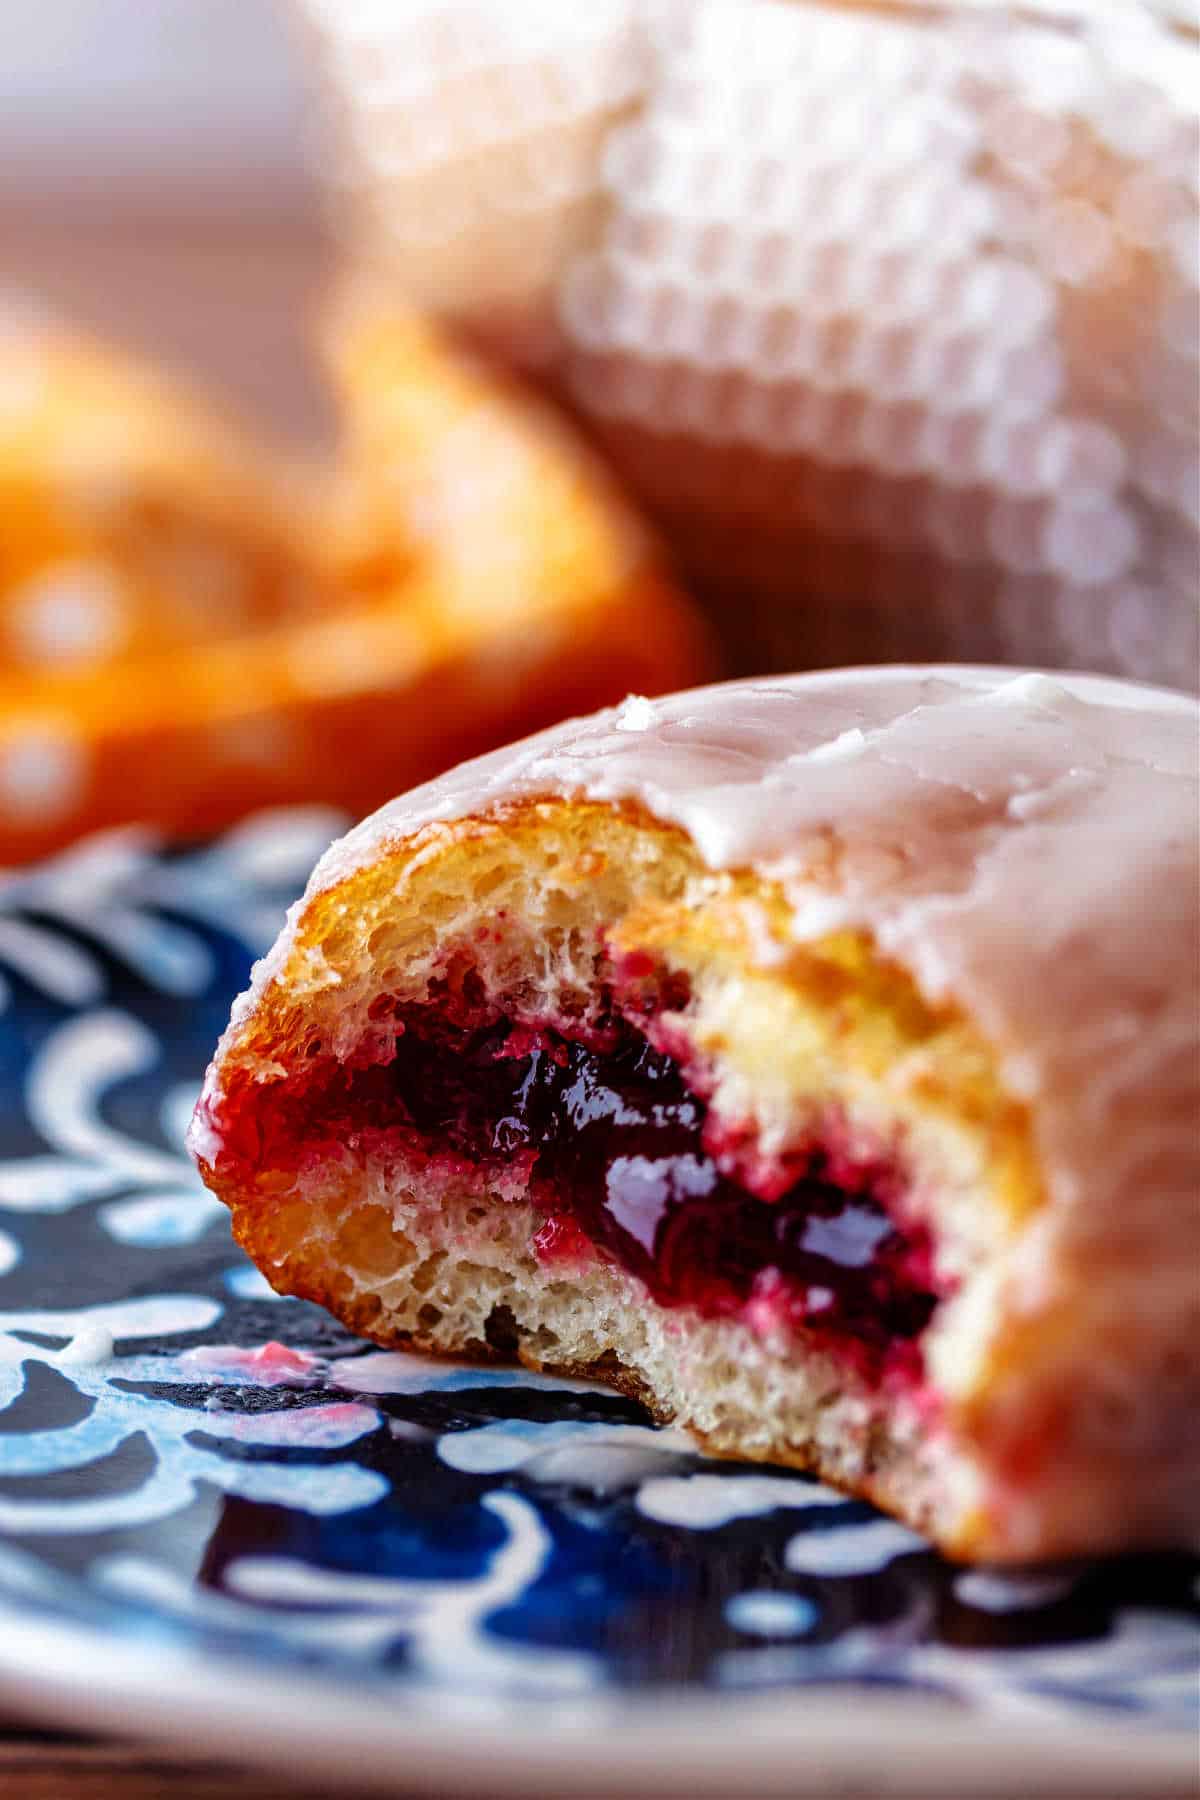 A close-up image of a jelly donut with a couple of bites taken out of it to reveal the ruby red raspberry filling.